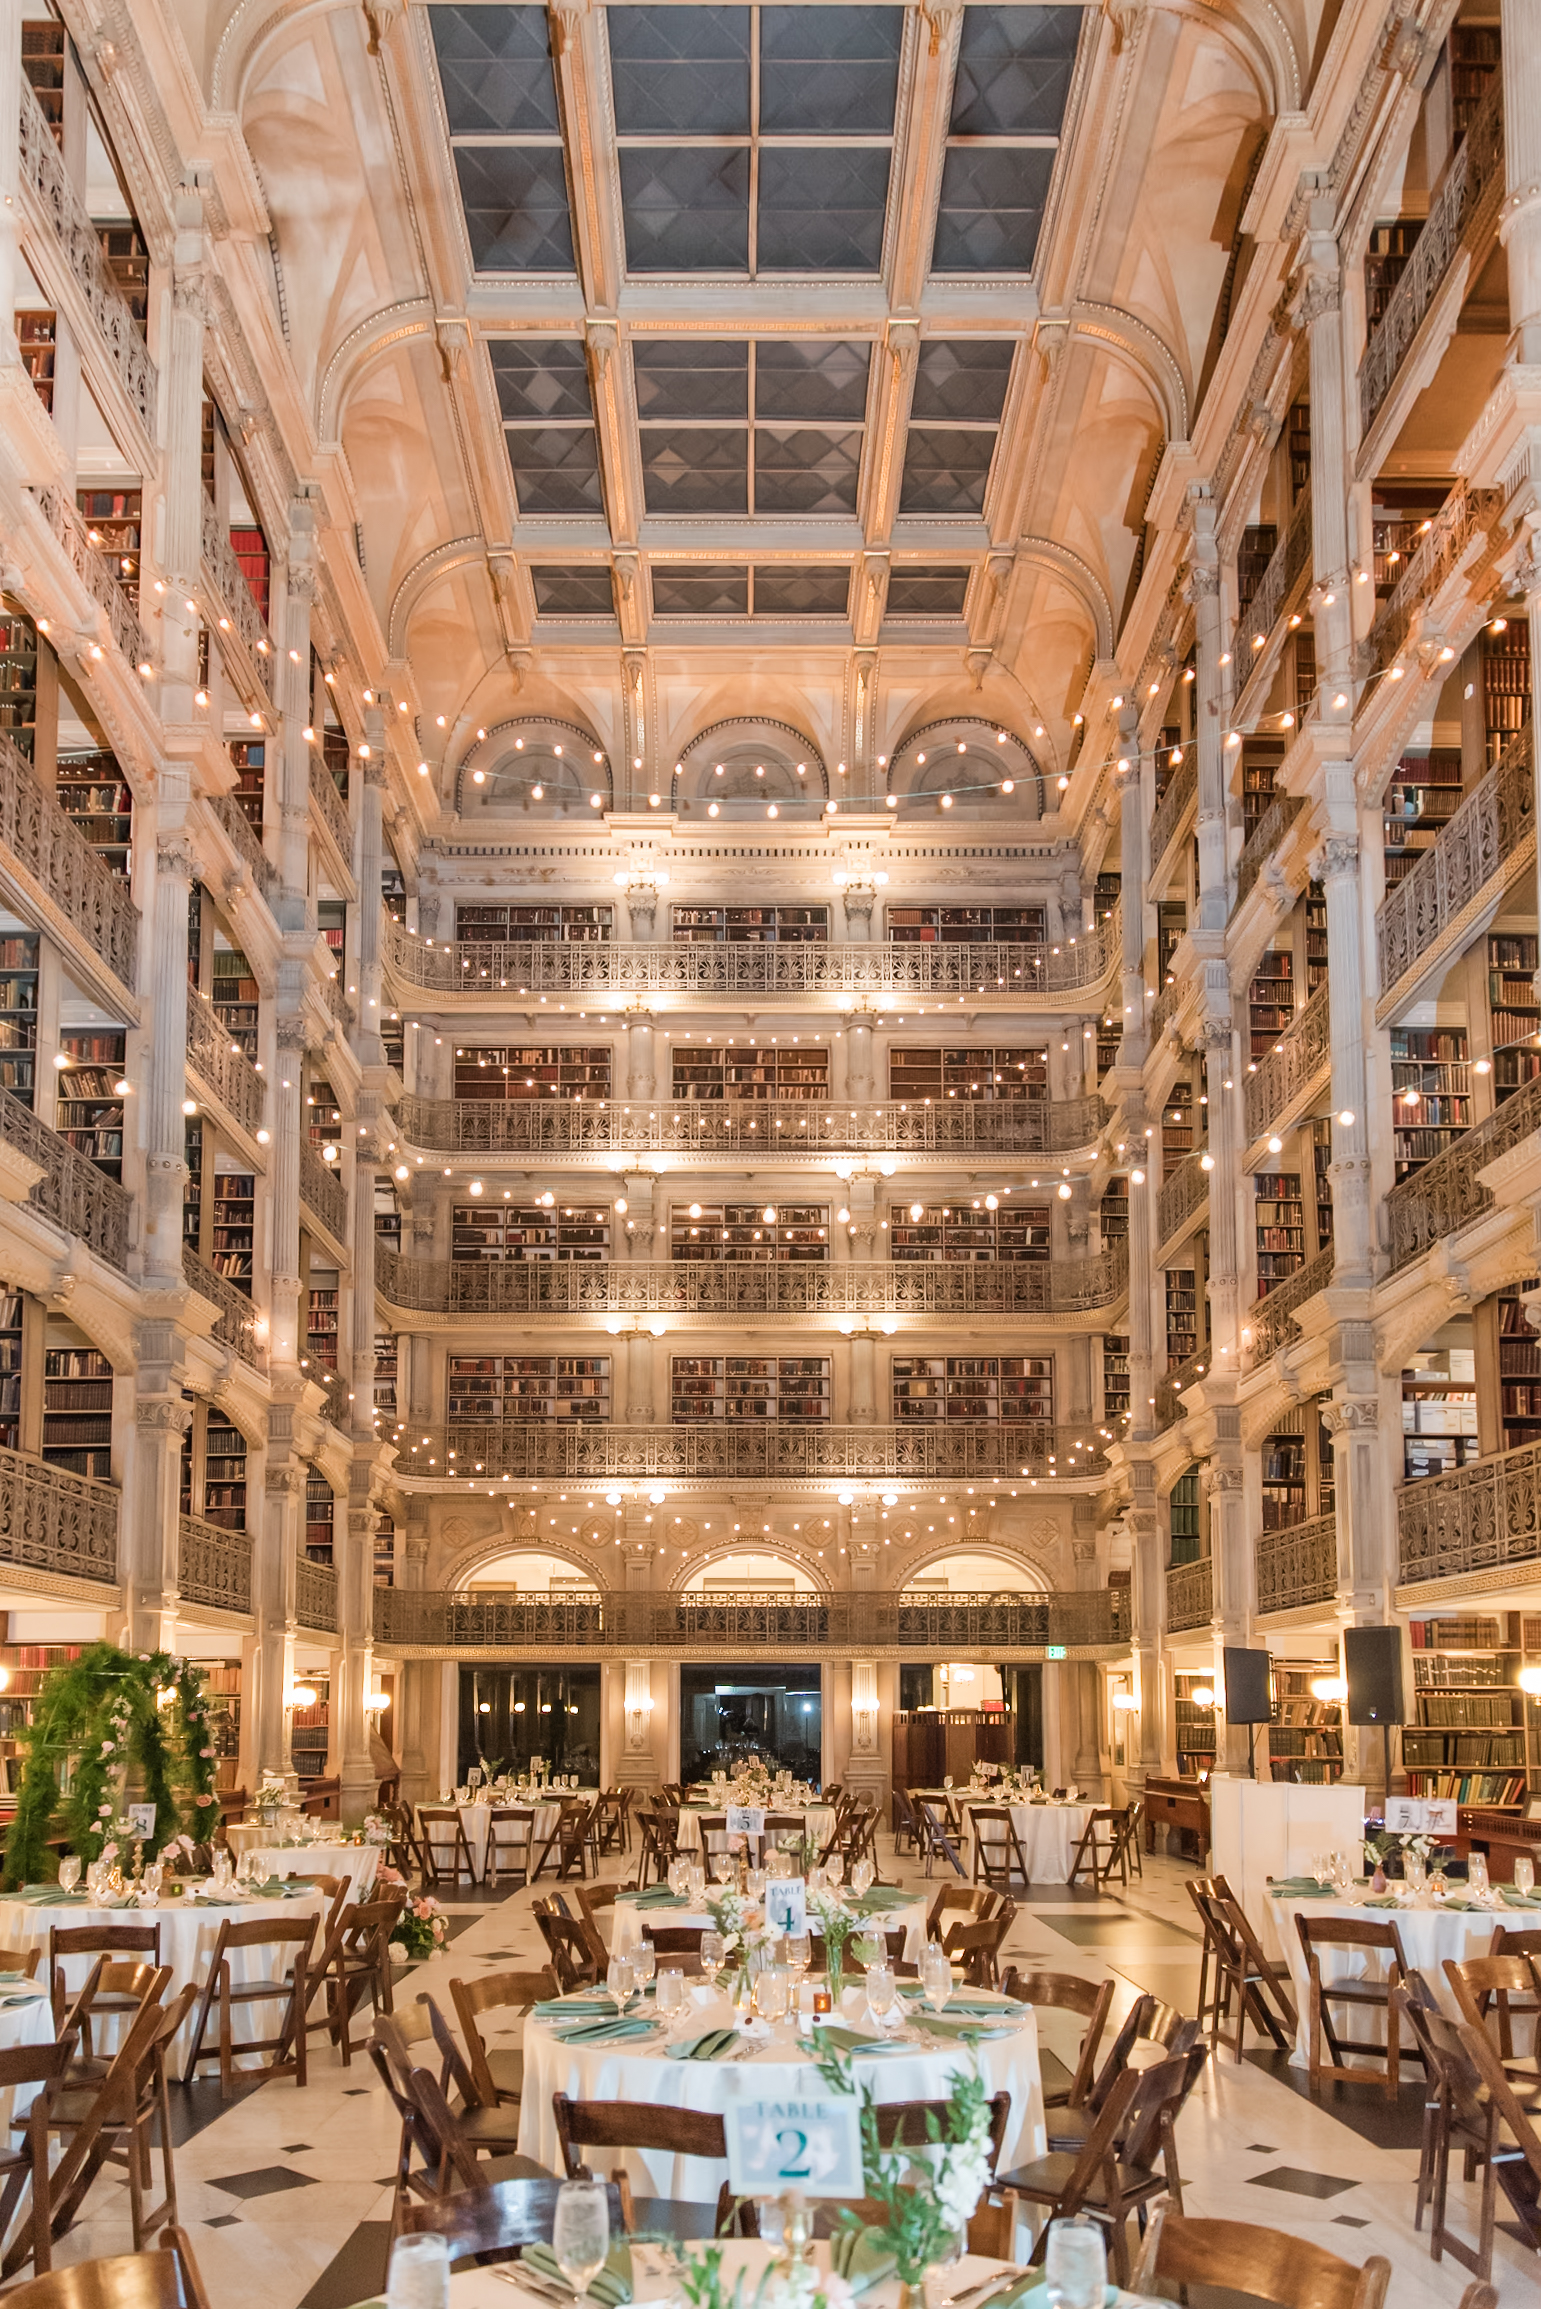 A wide view of the incredibly beautiful George Peabody Library Wedding venue set up with tables and market lights